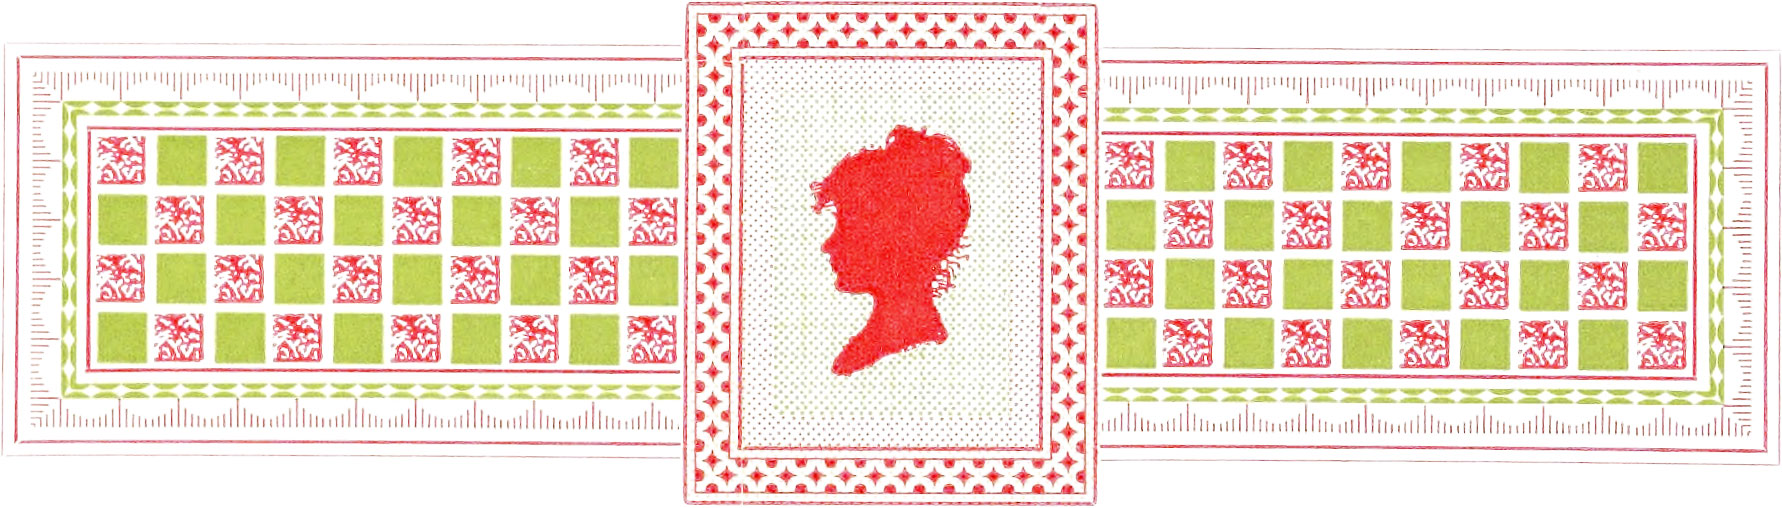 Checkered border with a female silhouette in the middle surrounded by a border comprising red and light green colors